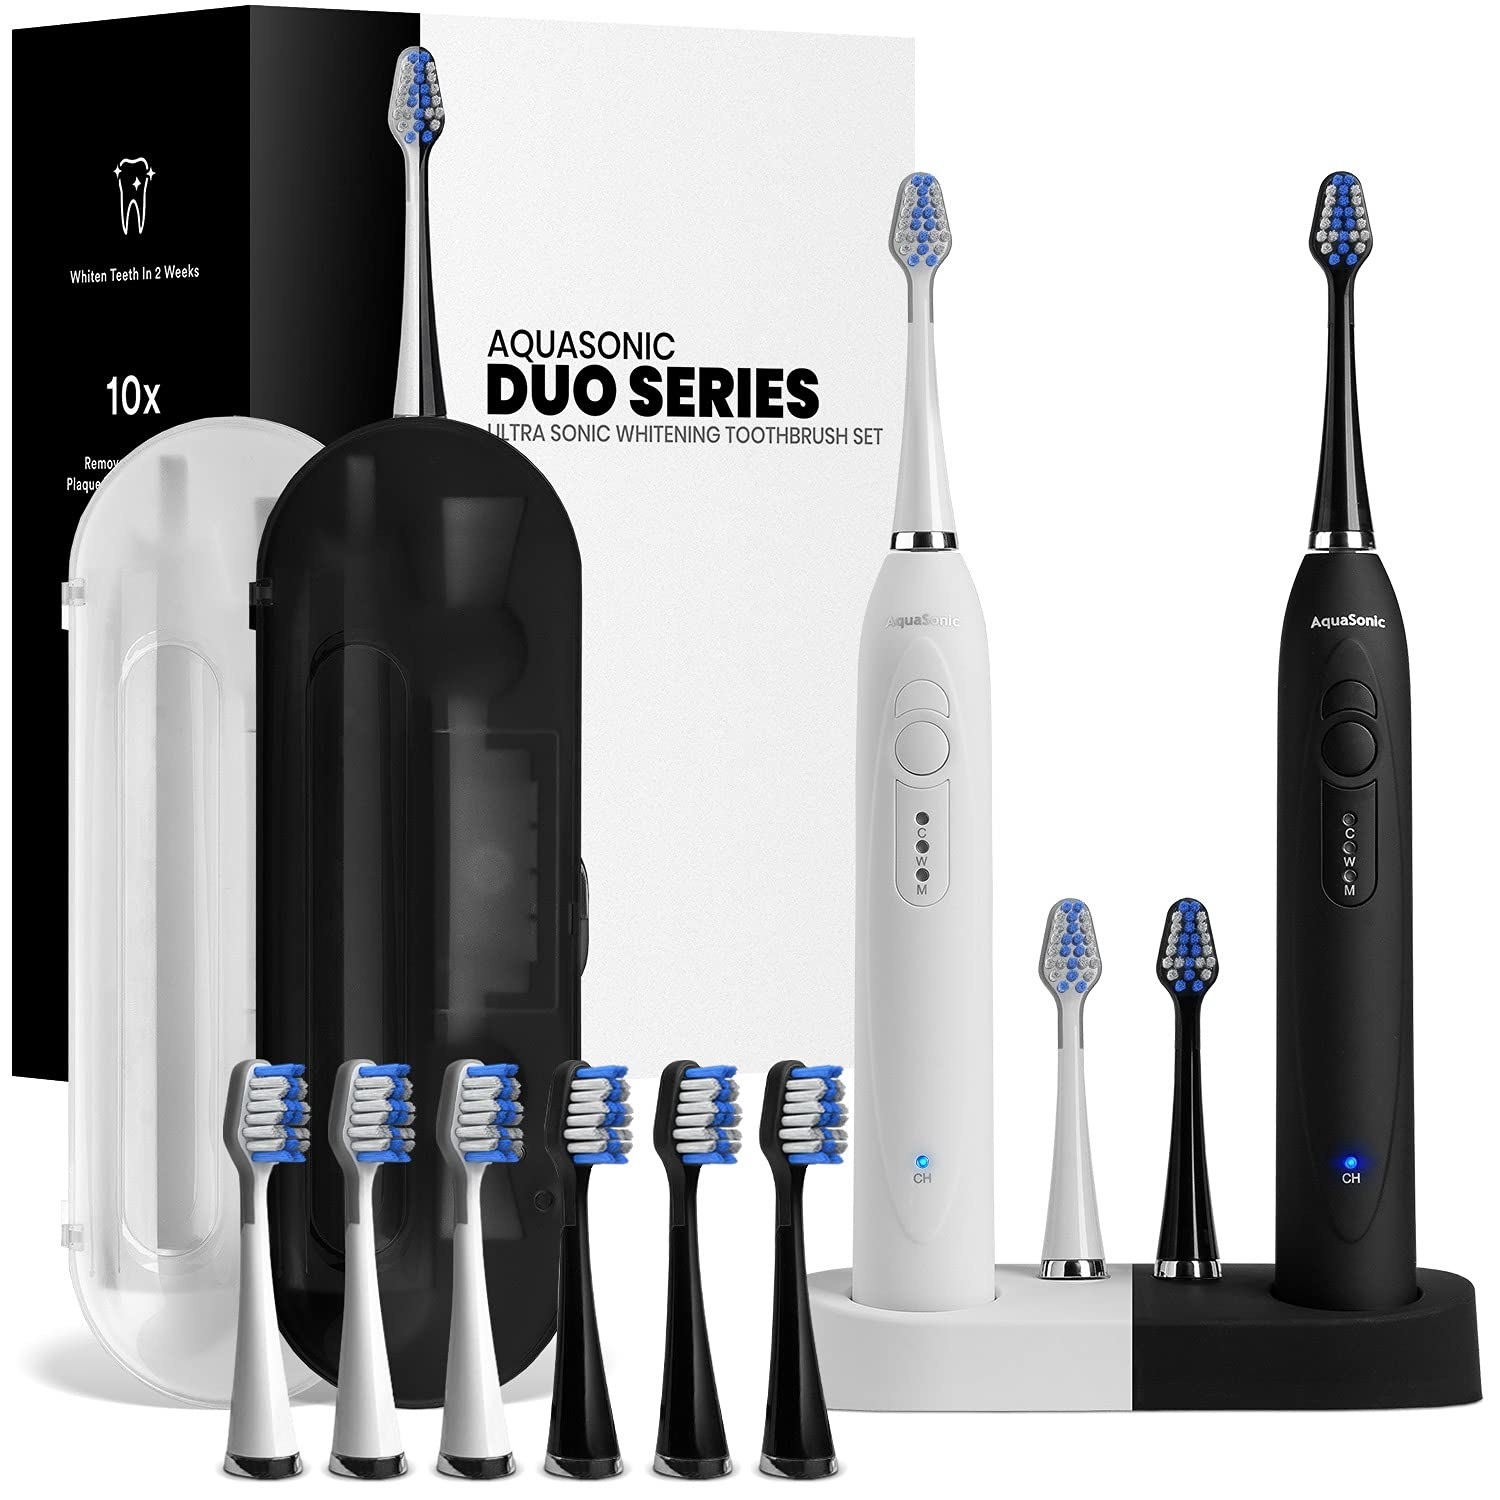 the toothbrush set